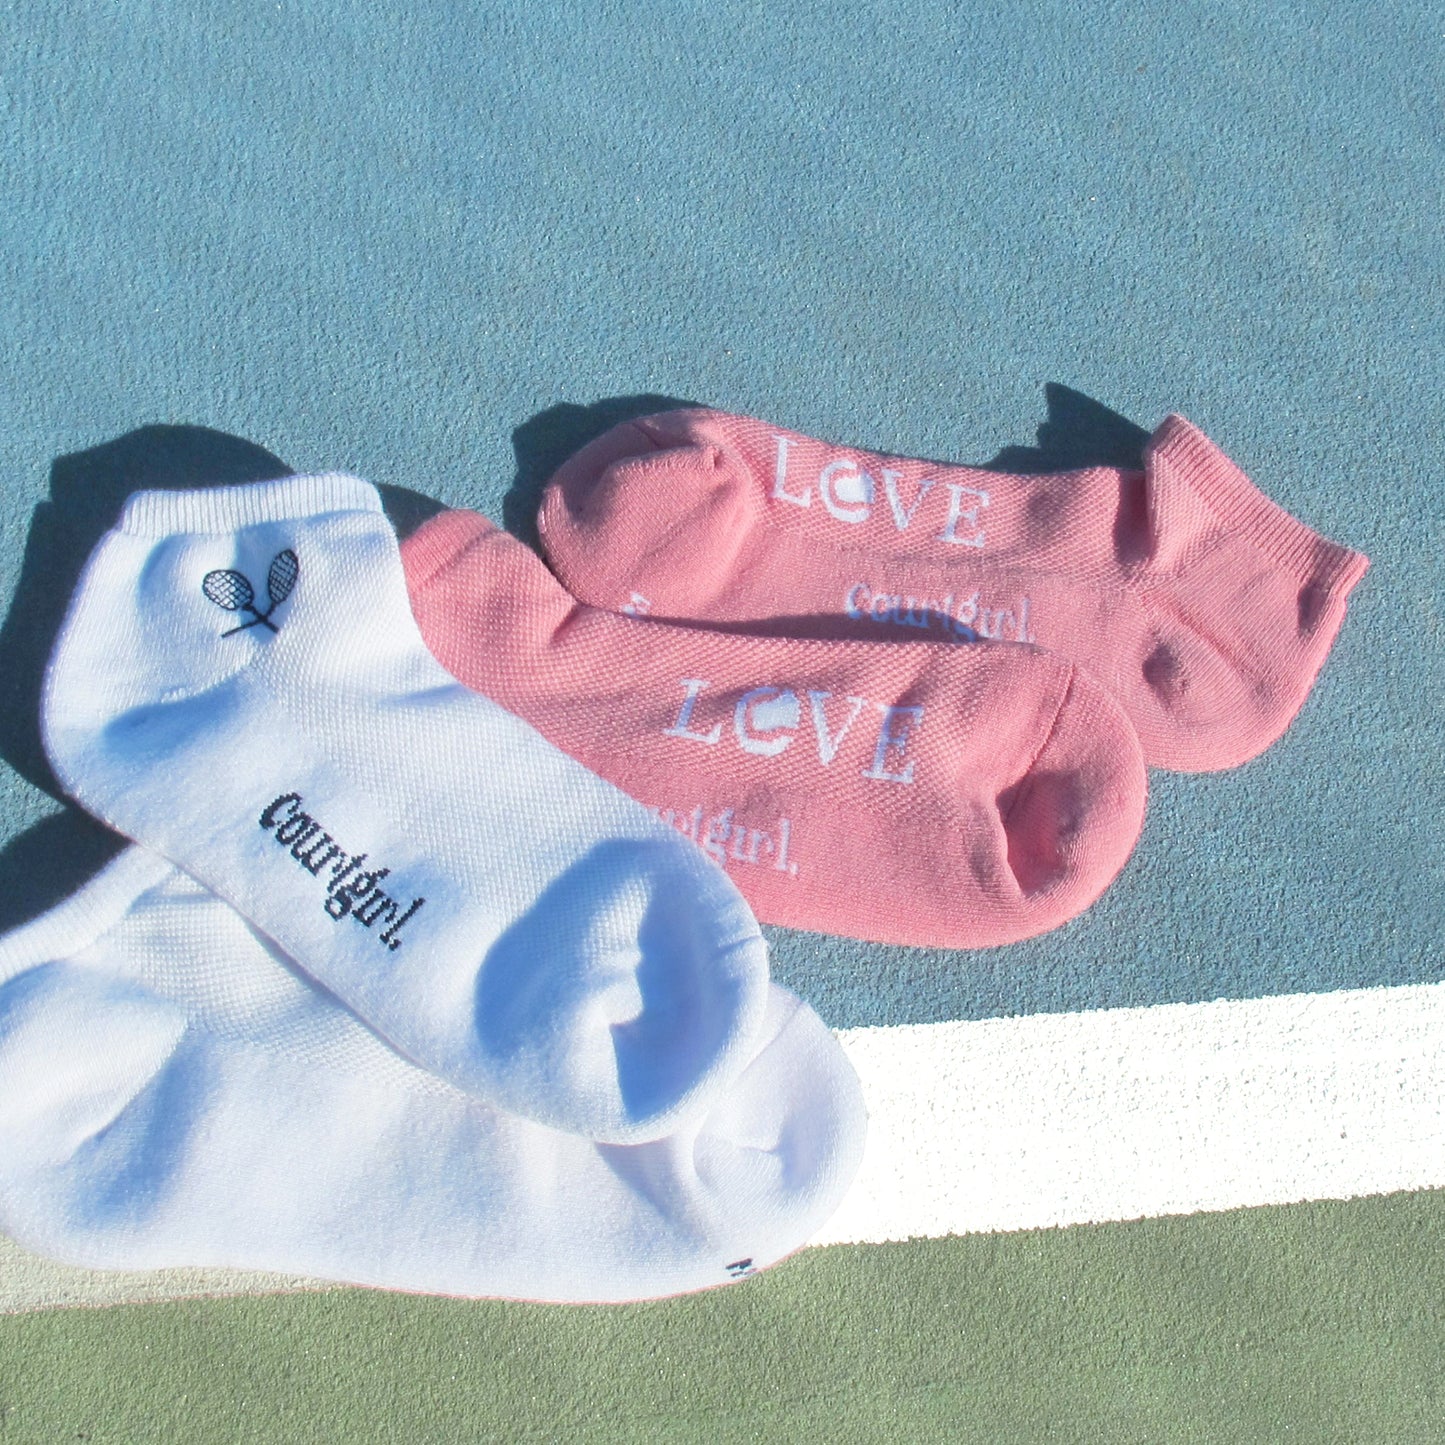 Matchtime Sock (1 Pair)